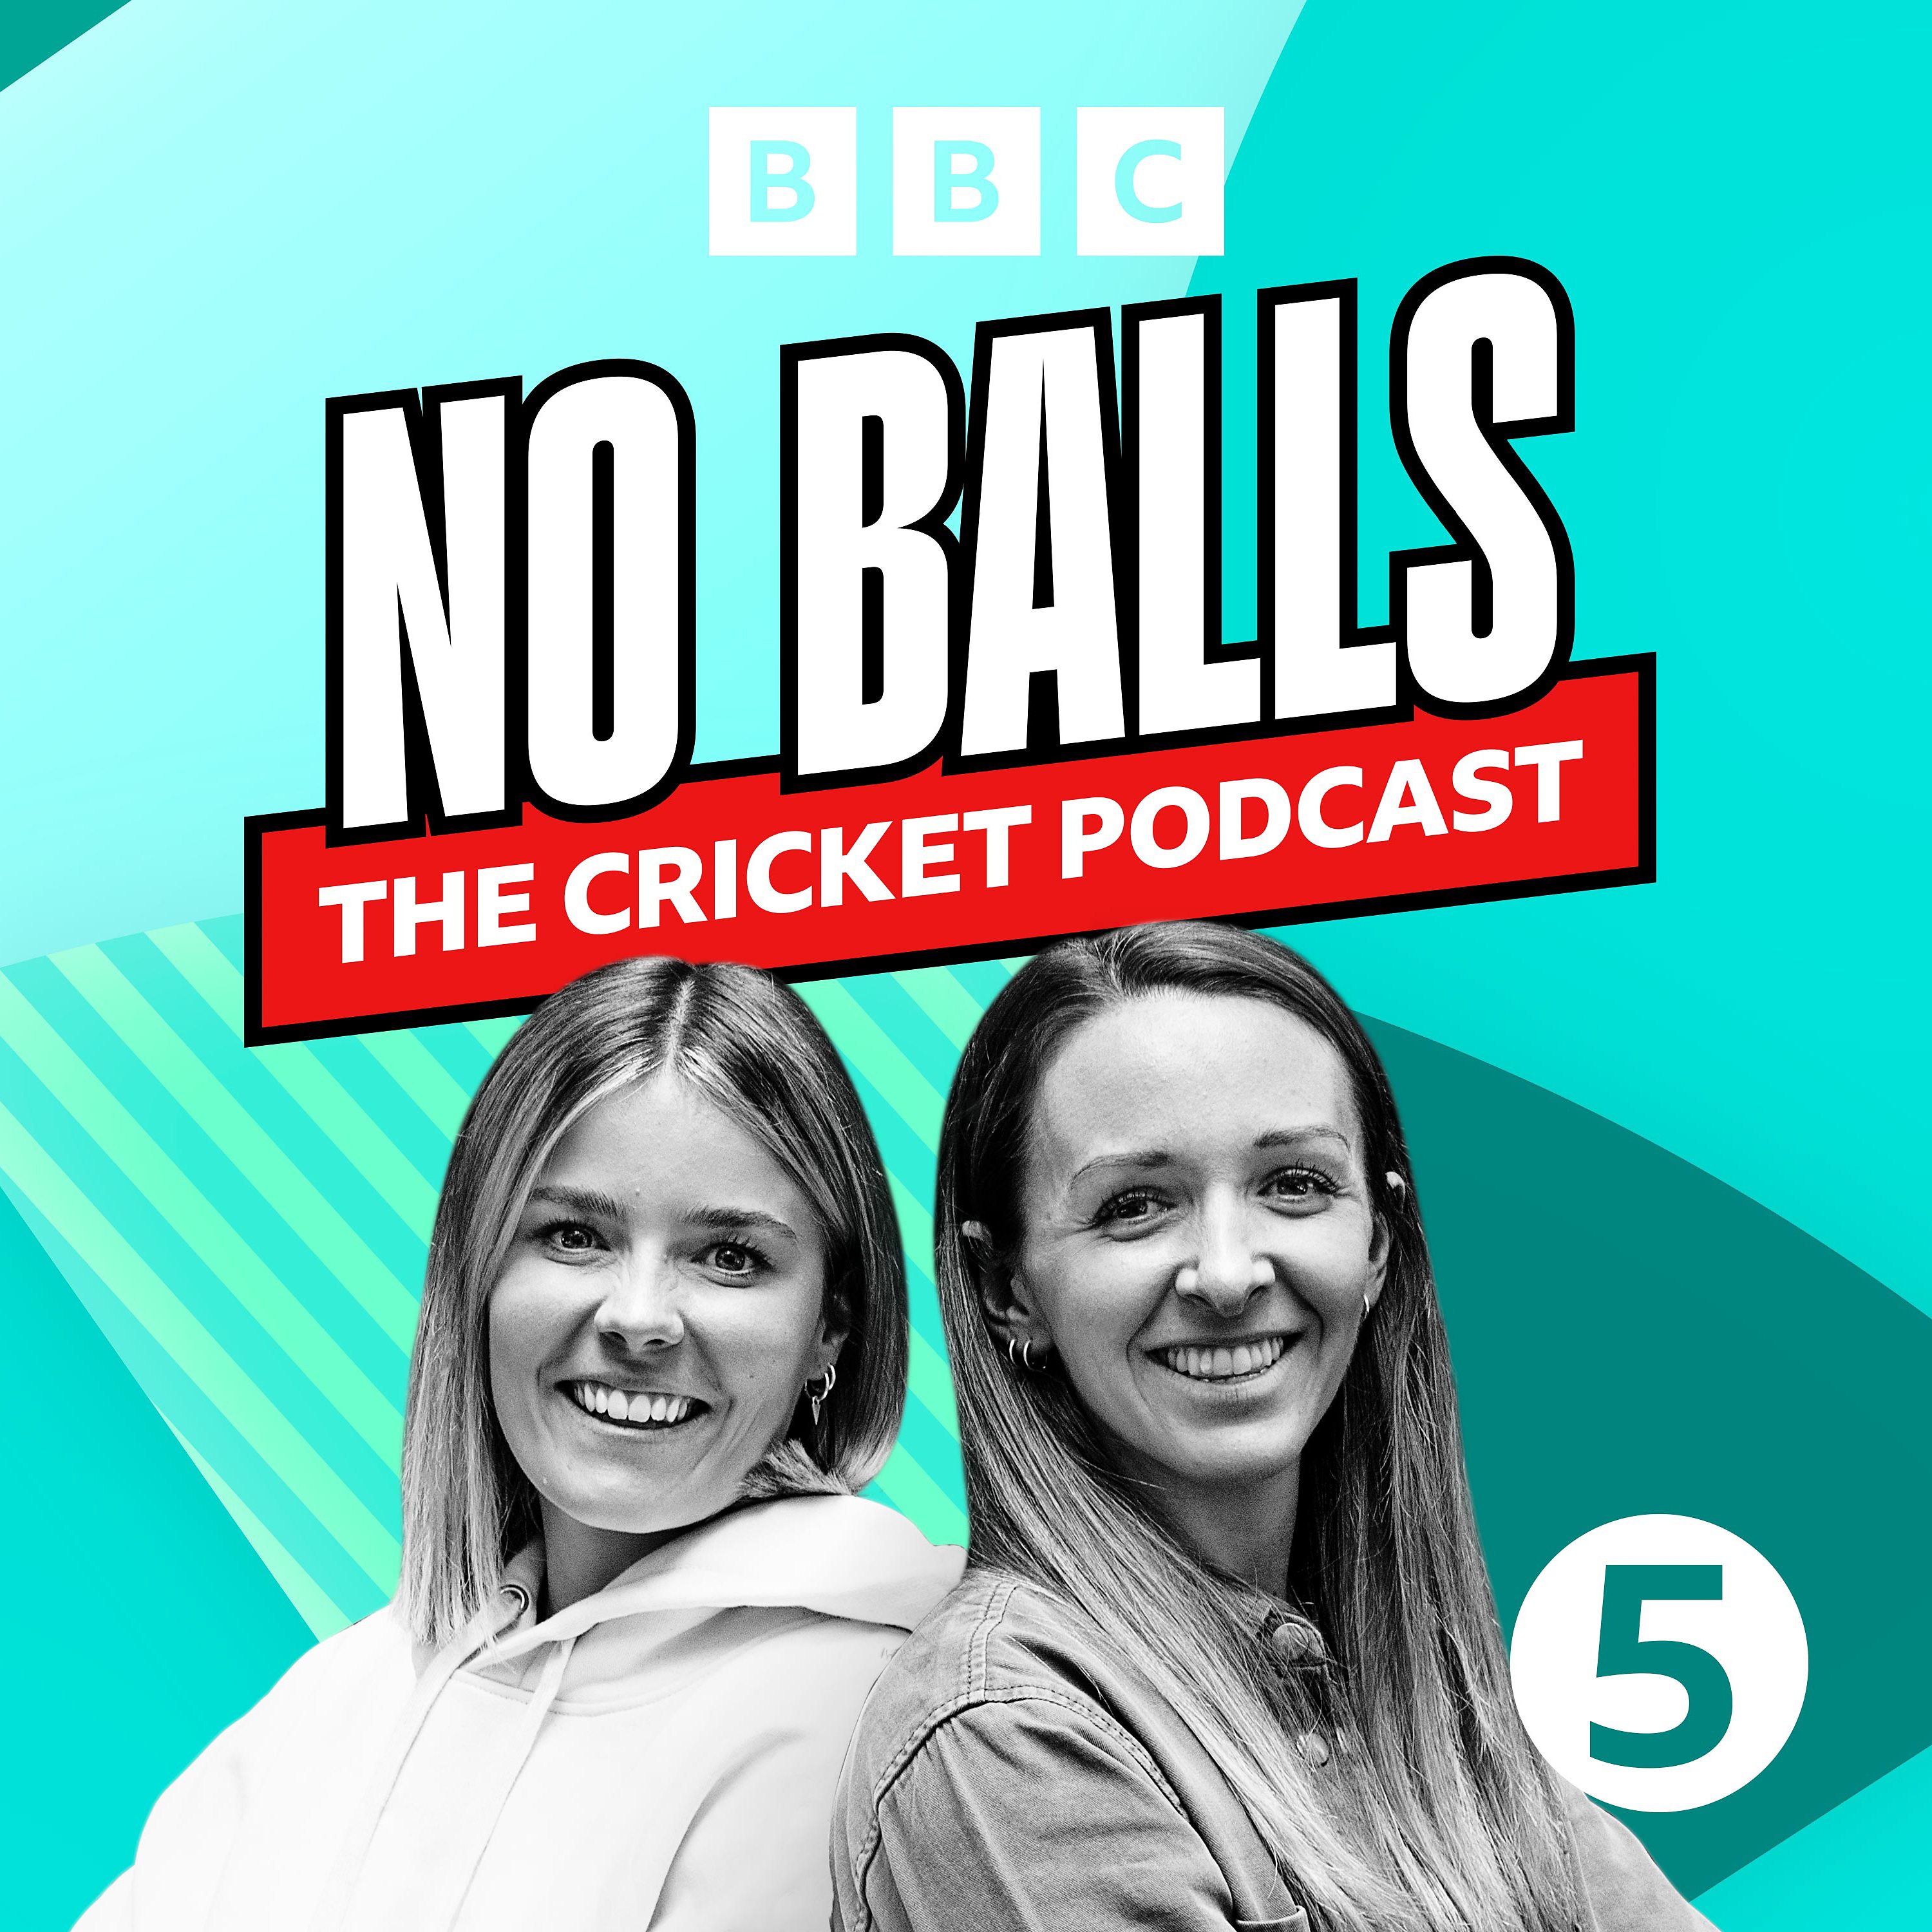 No Balls: The Cricket Podcast - Thunder teammate Olivia Thomas on autism, friendship and the power of cricket